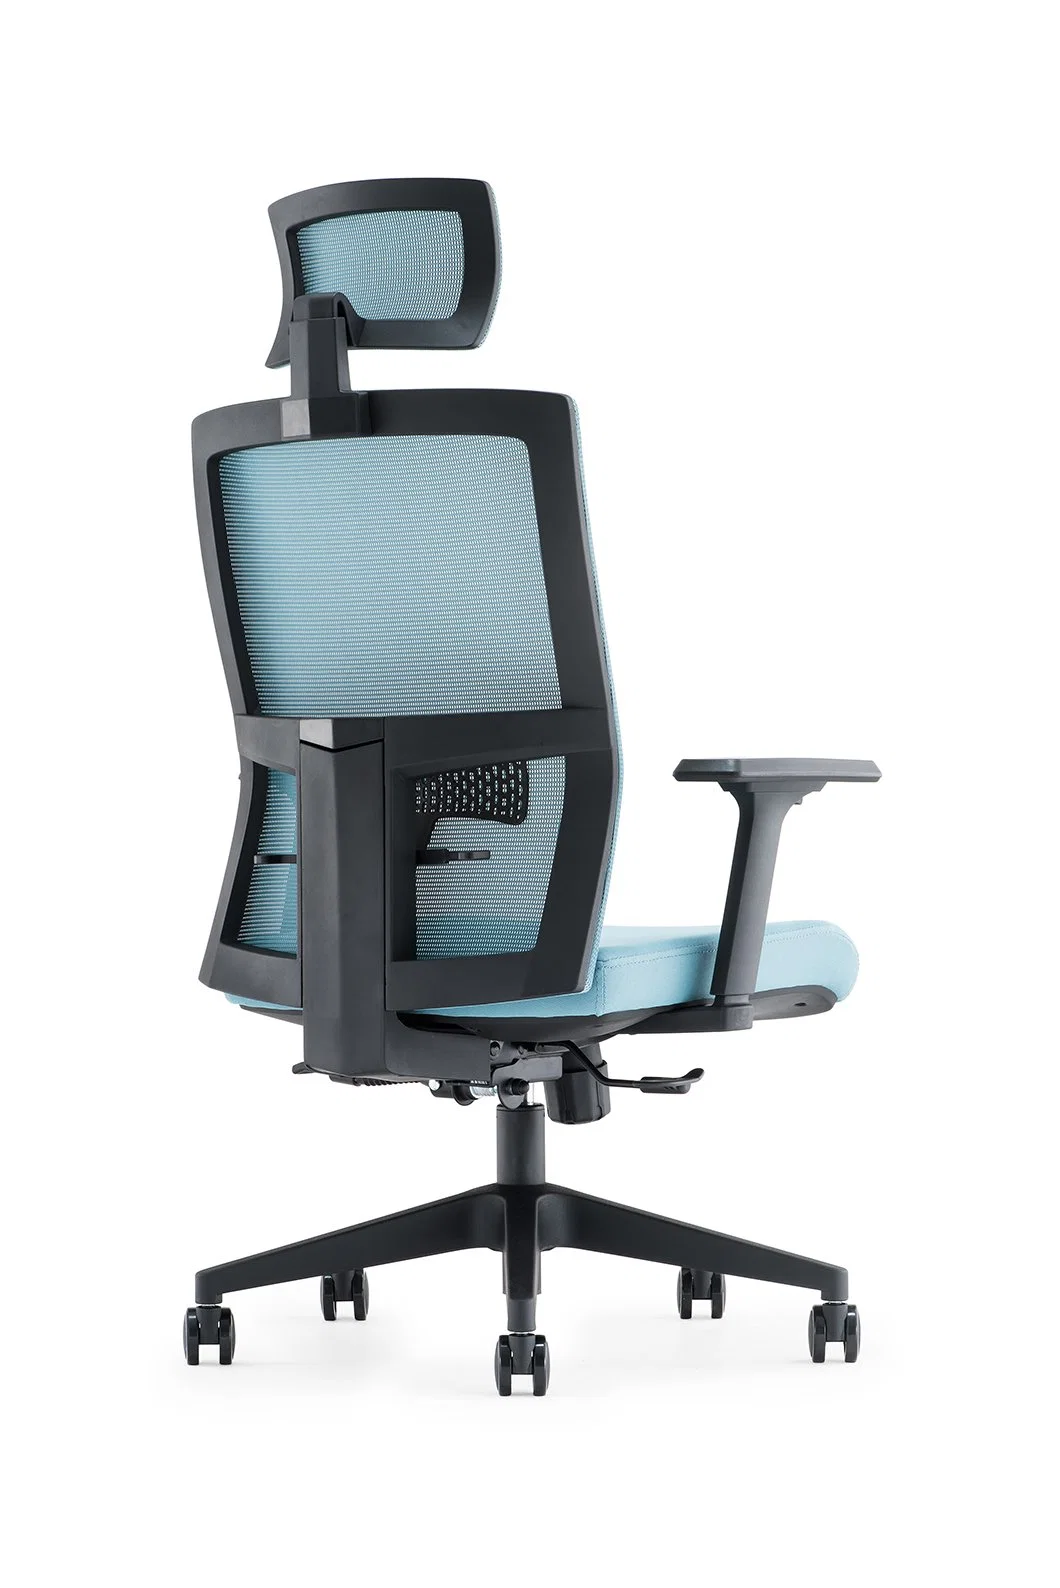 Sovan Mesh Swivel Executive Gaming Furniture Office Chair with Adjustable Armrest High Density Molded Foam